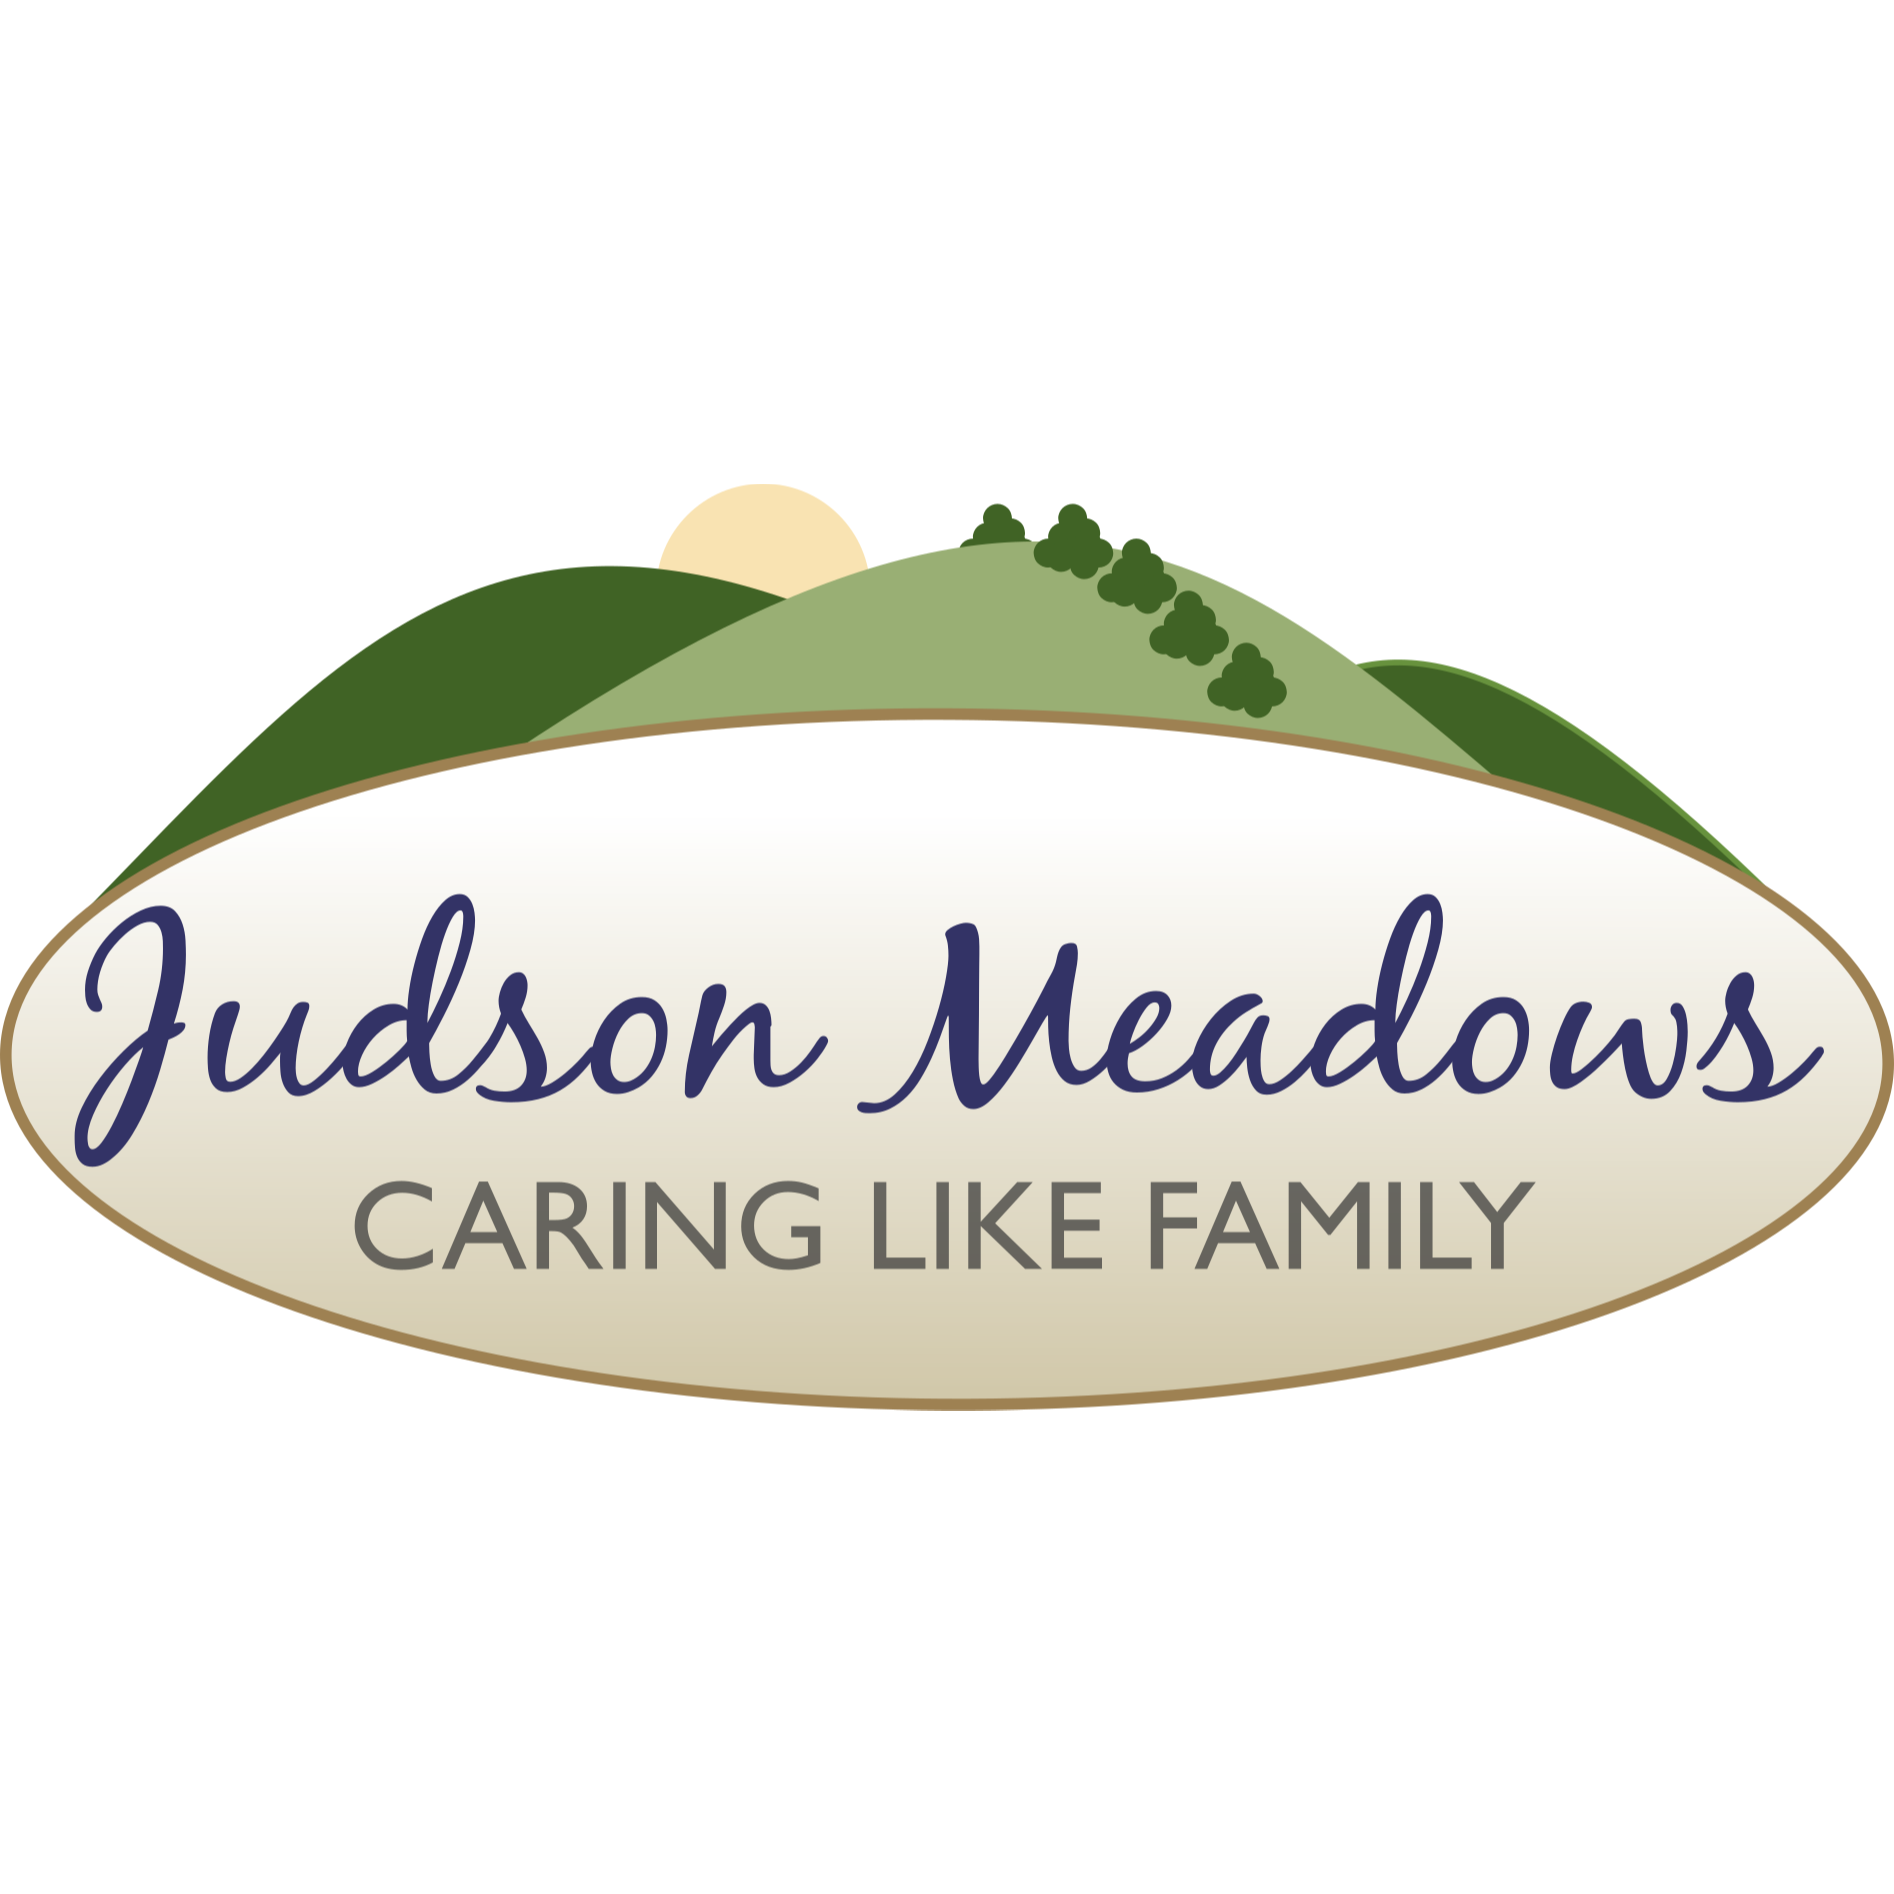 Judson Meadows Assisted Living